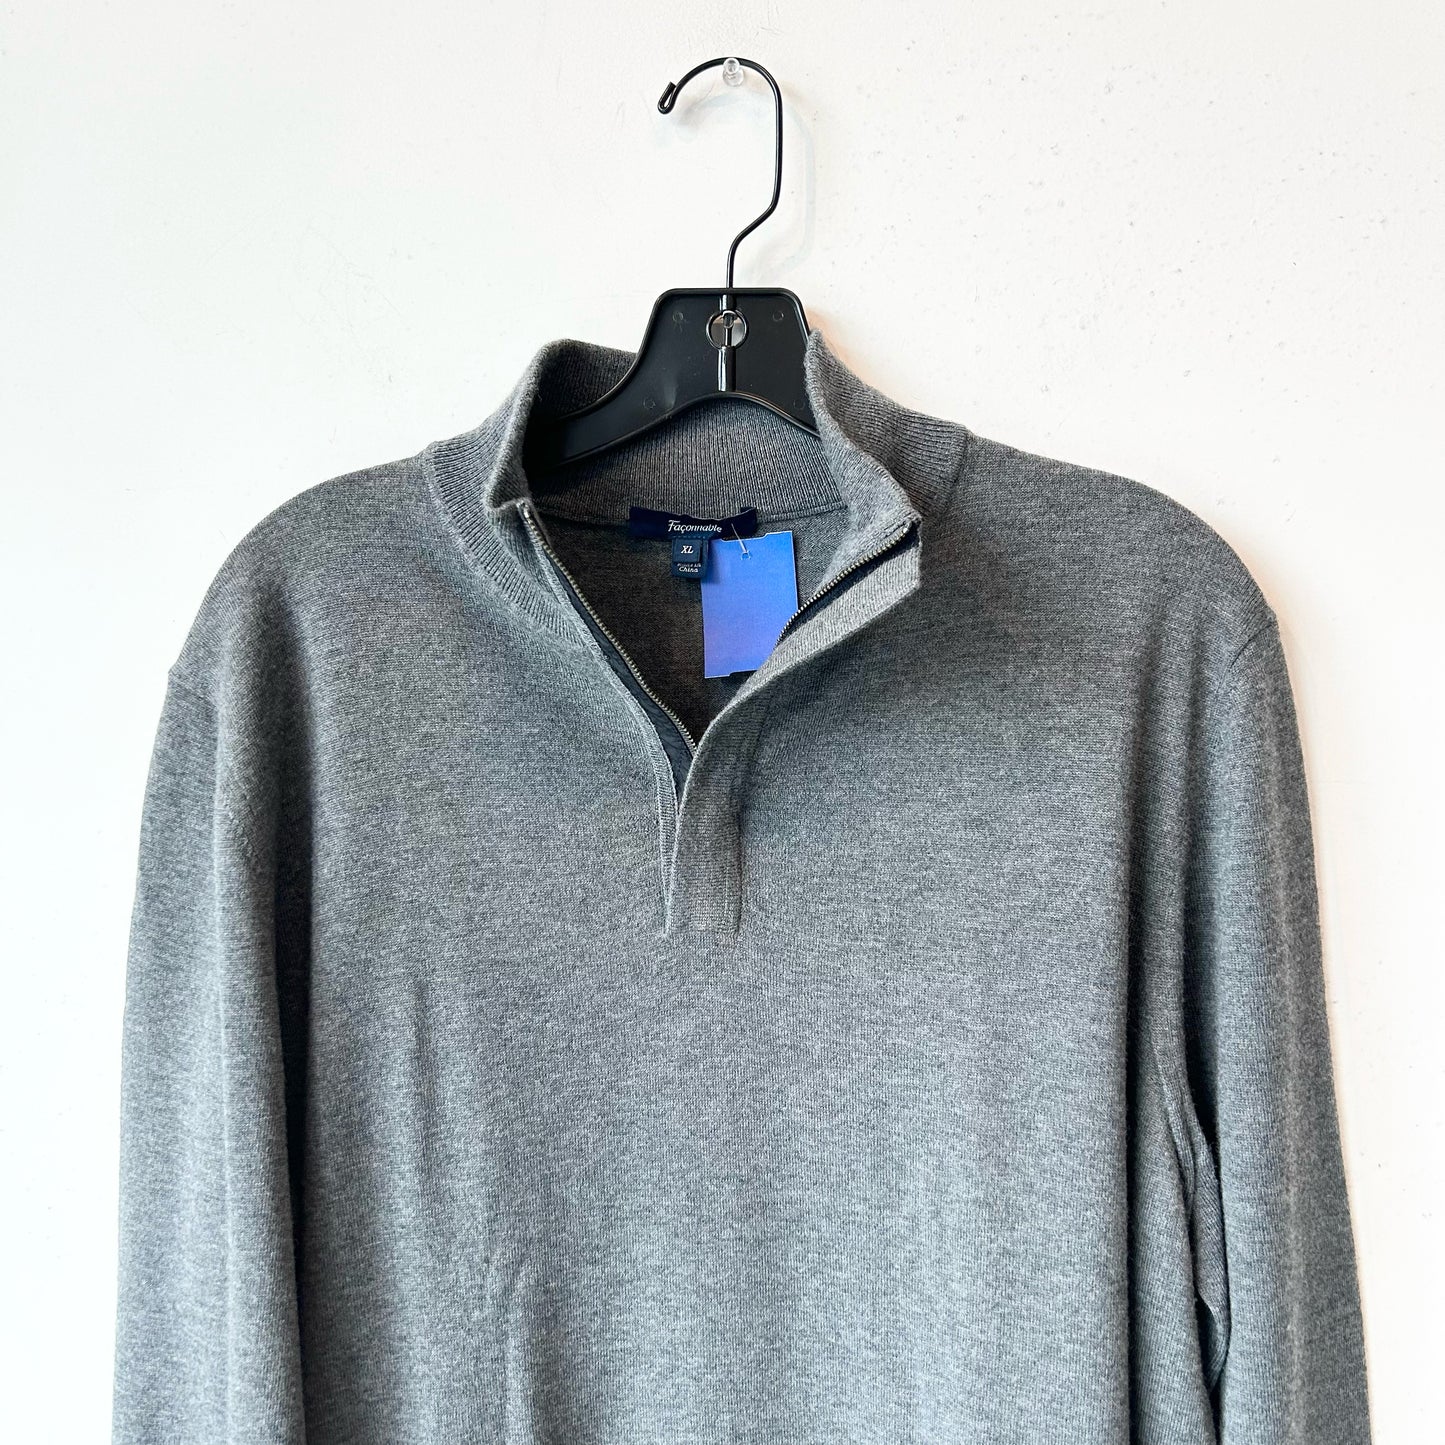 XL Gray Faconnable Wool Sweater